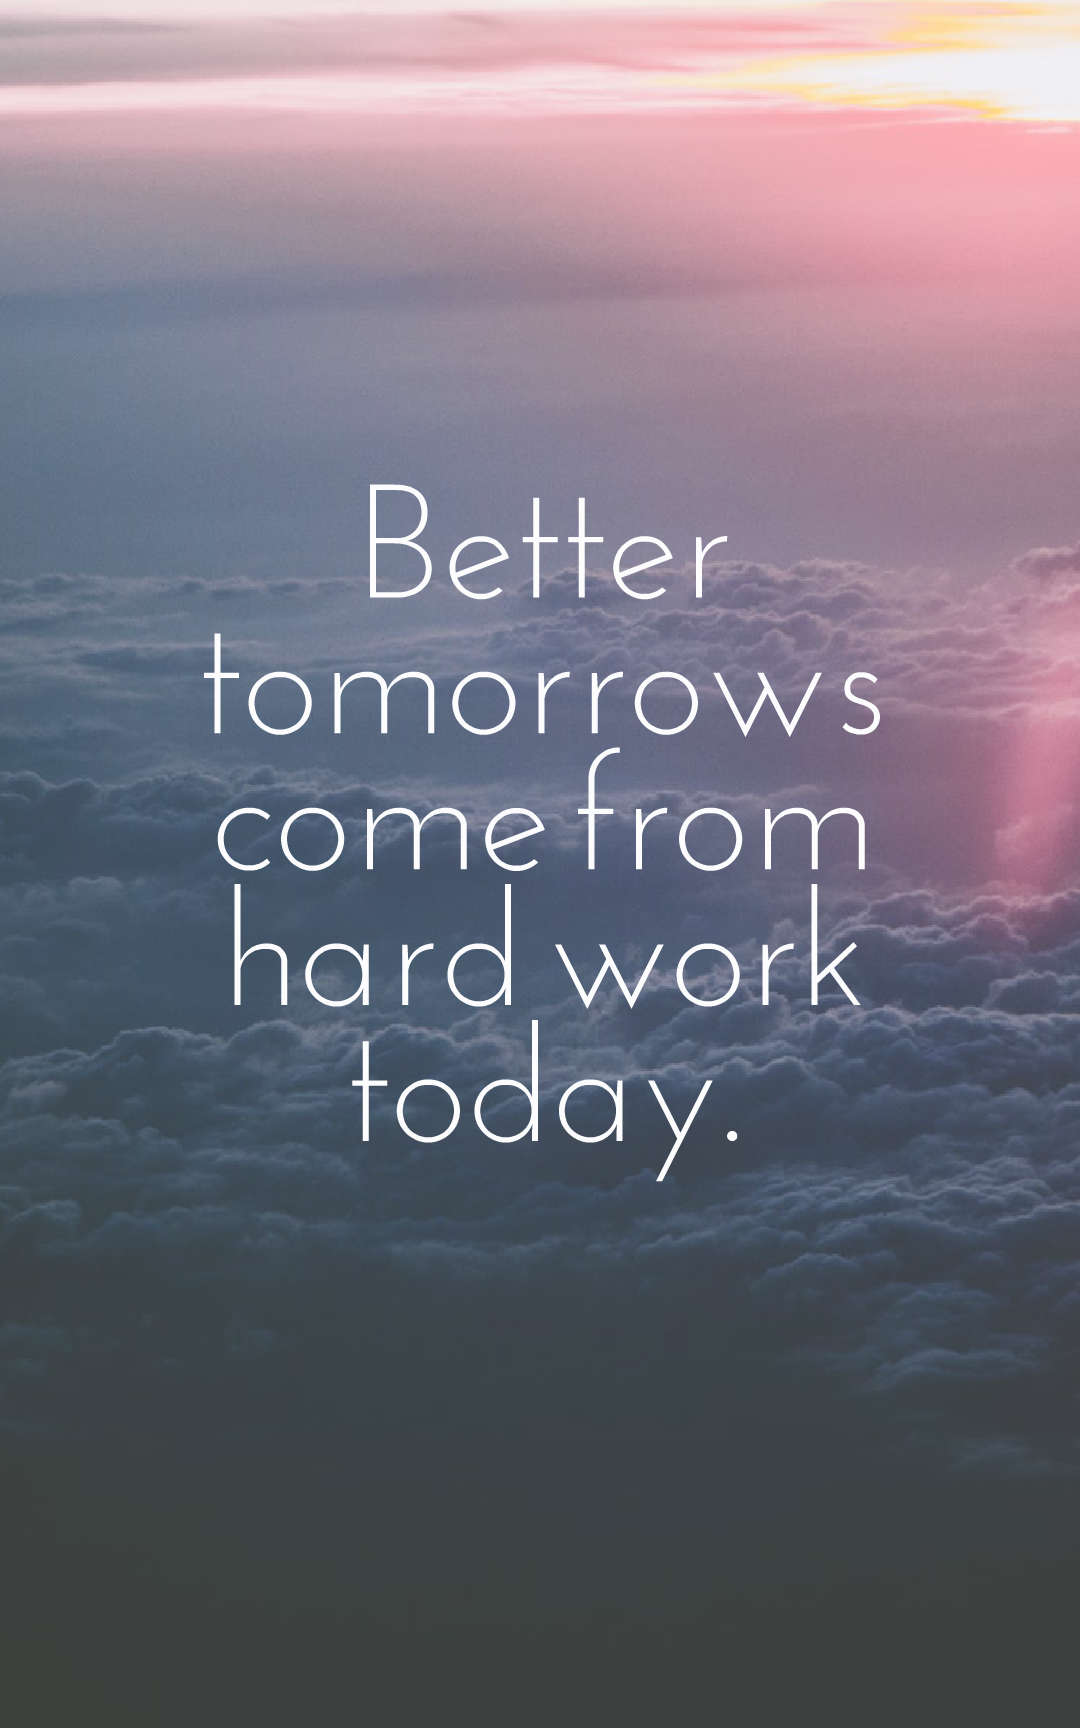 Better tomorrows come from hard work today